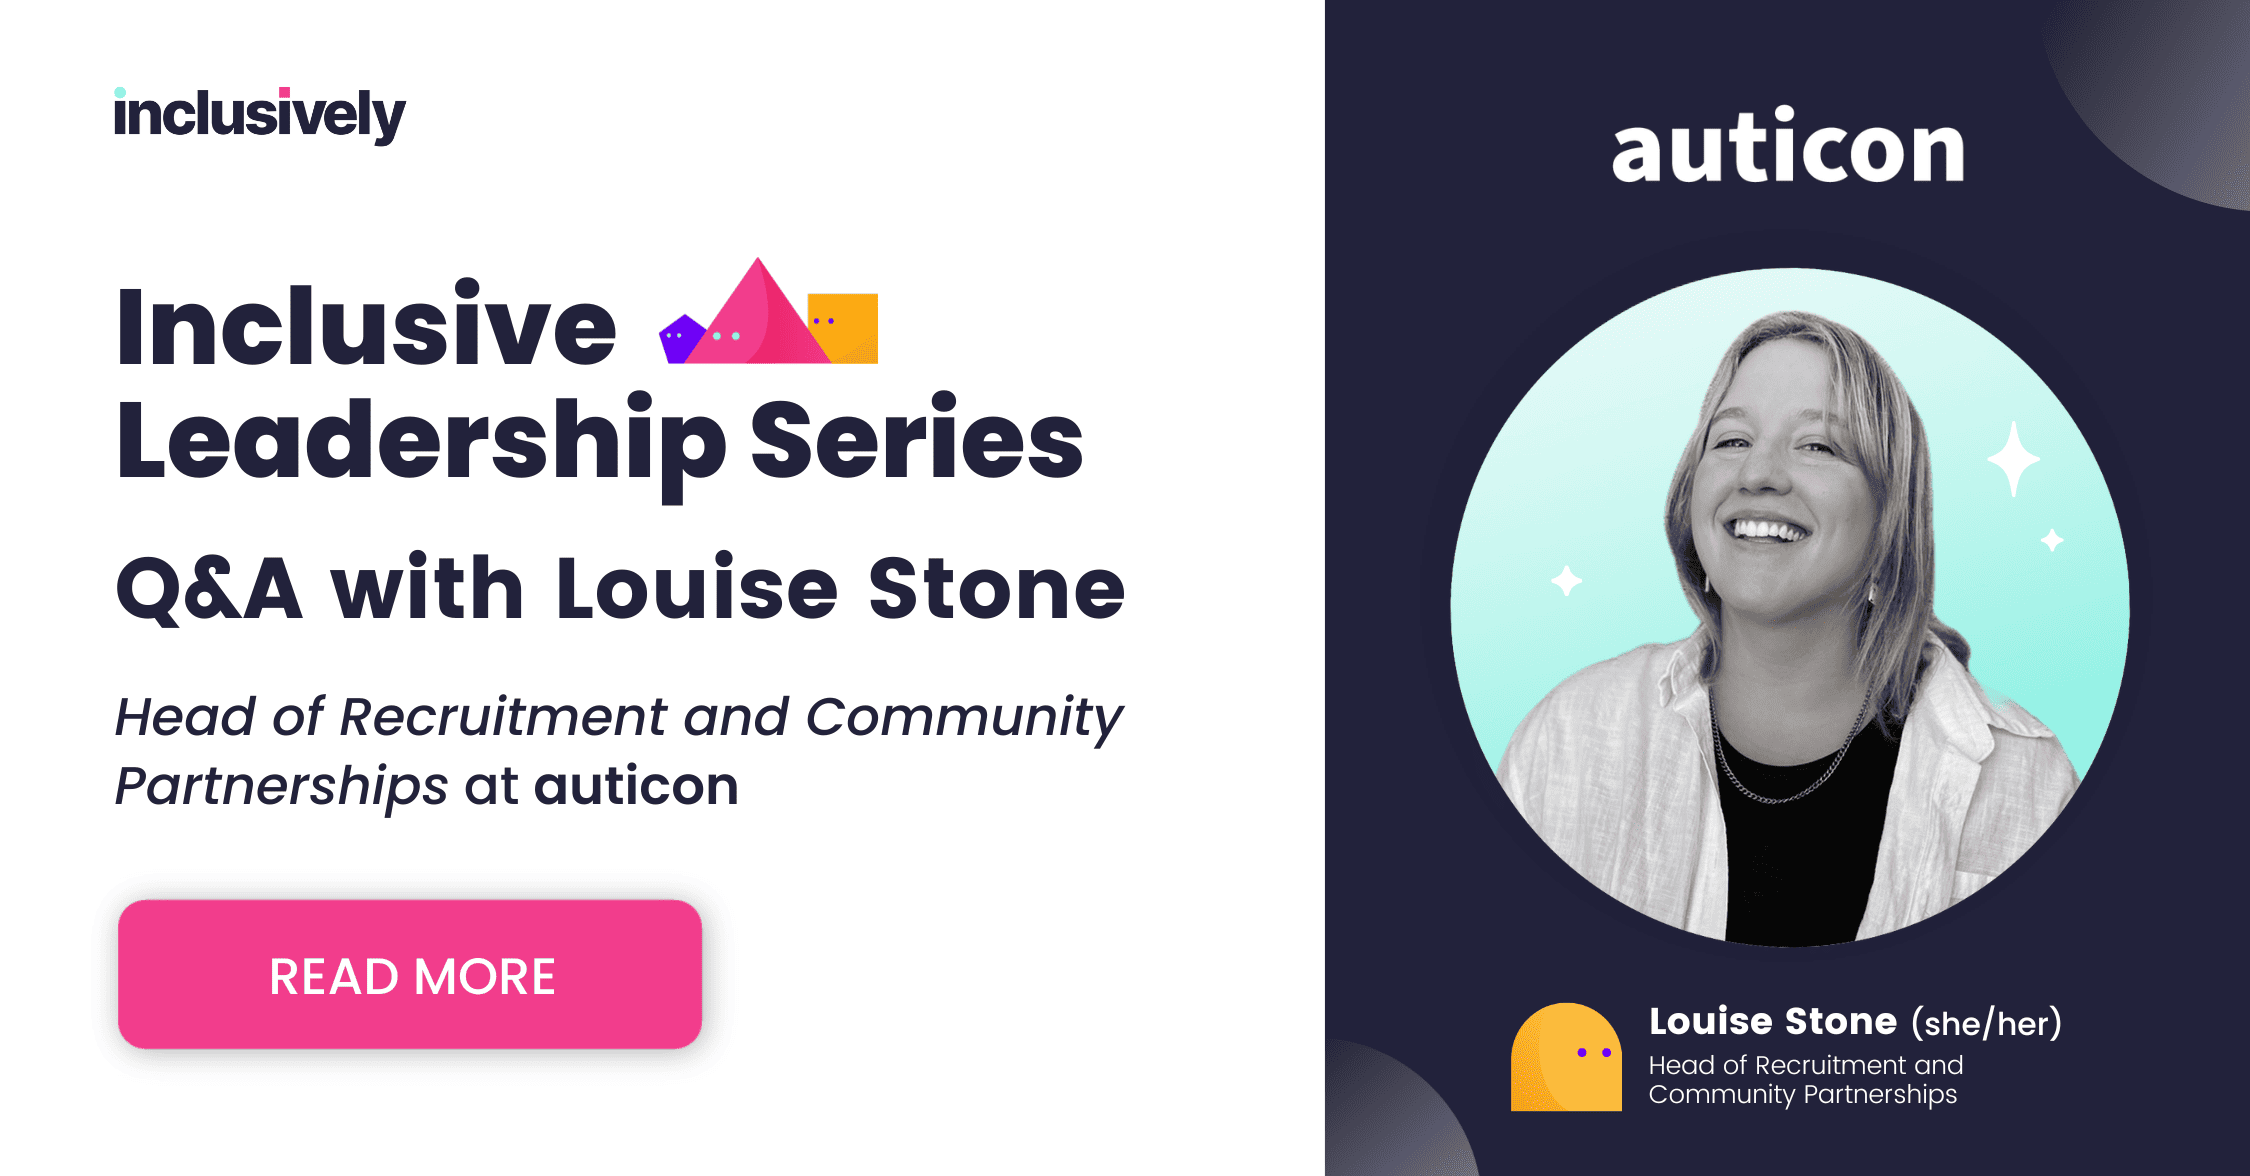 On a white background, Inclusive Leadership Series, Q&A with Louise Stone, Head of Recruitment and Community Partnerships at auticon. On the right, Louise, a white woman with shoulder length blonde hair smiling in a black shirt with a white overshirt.